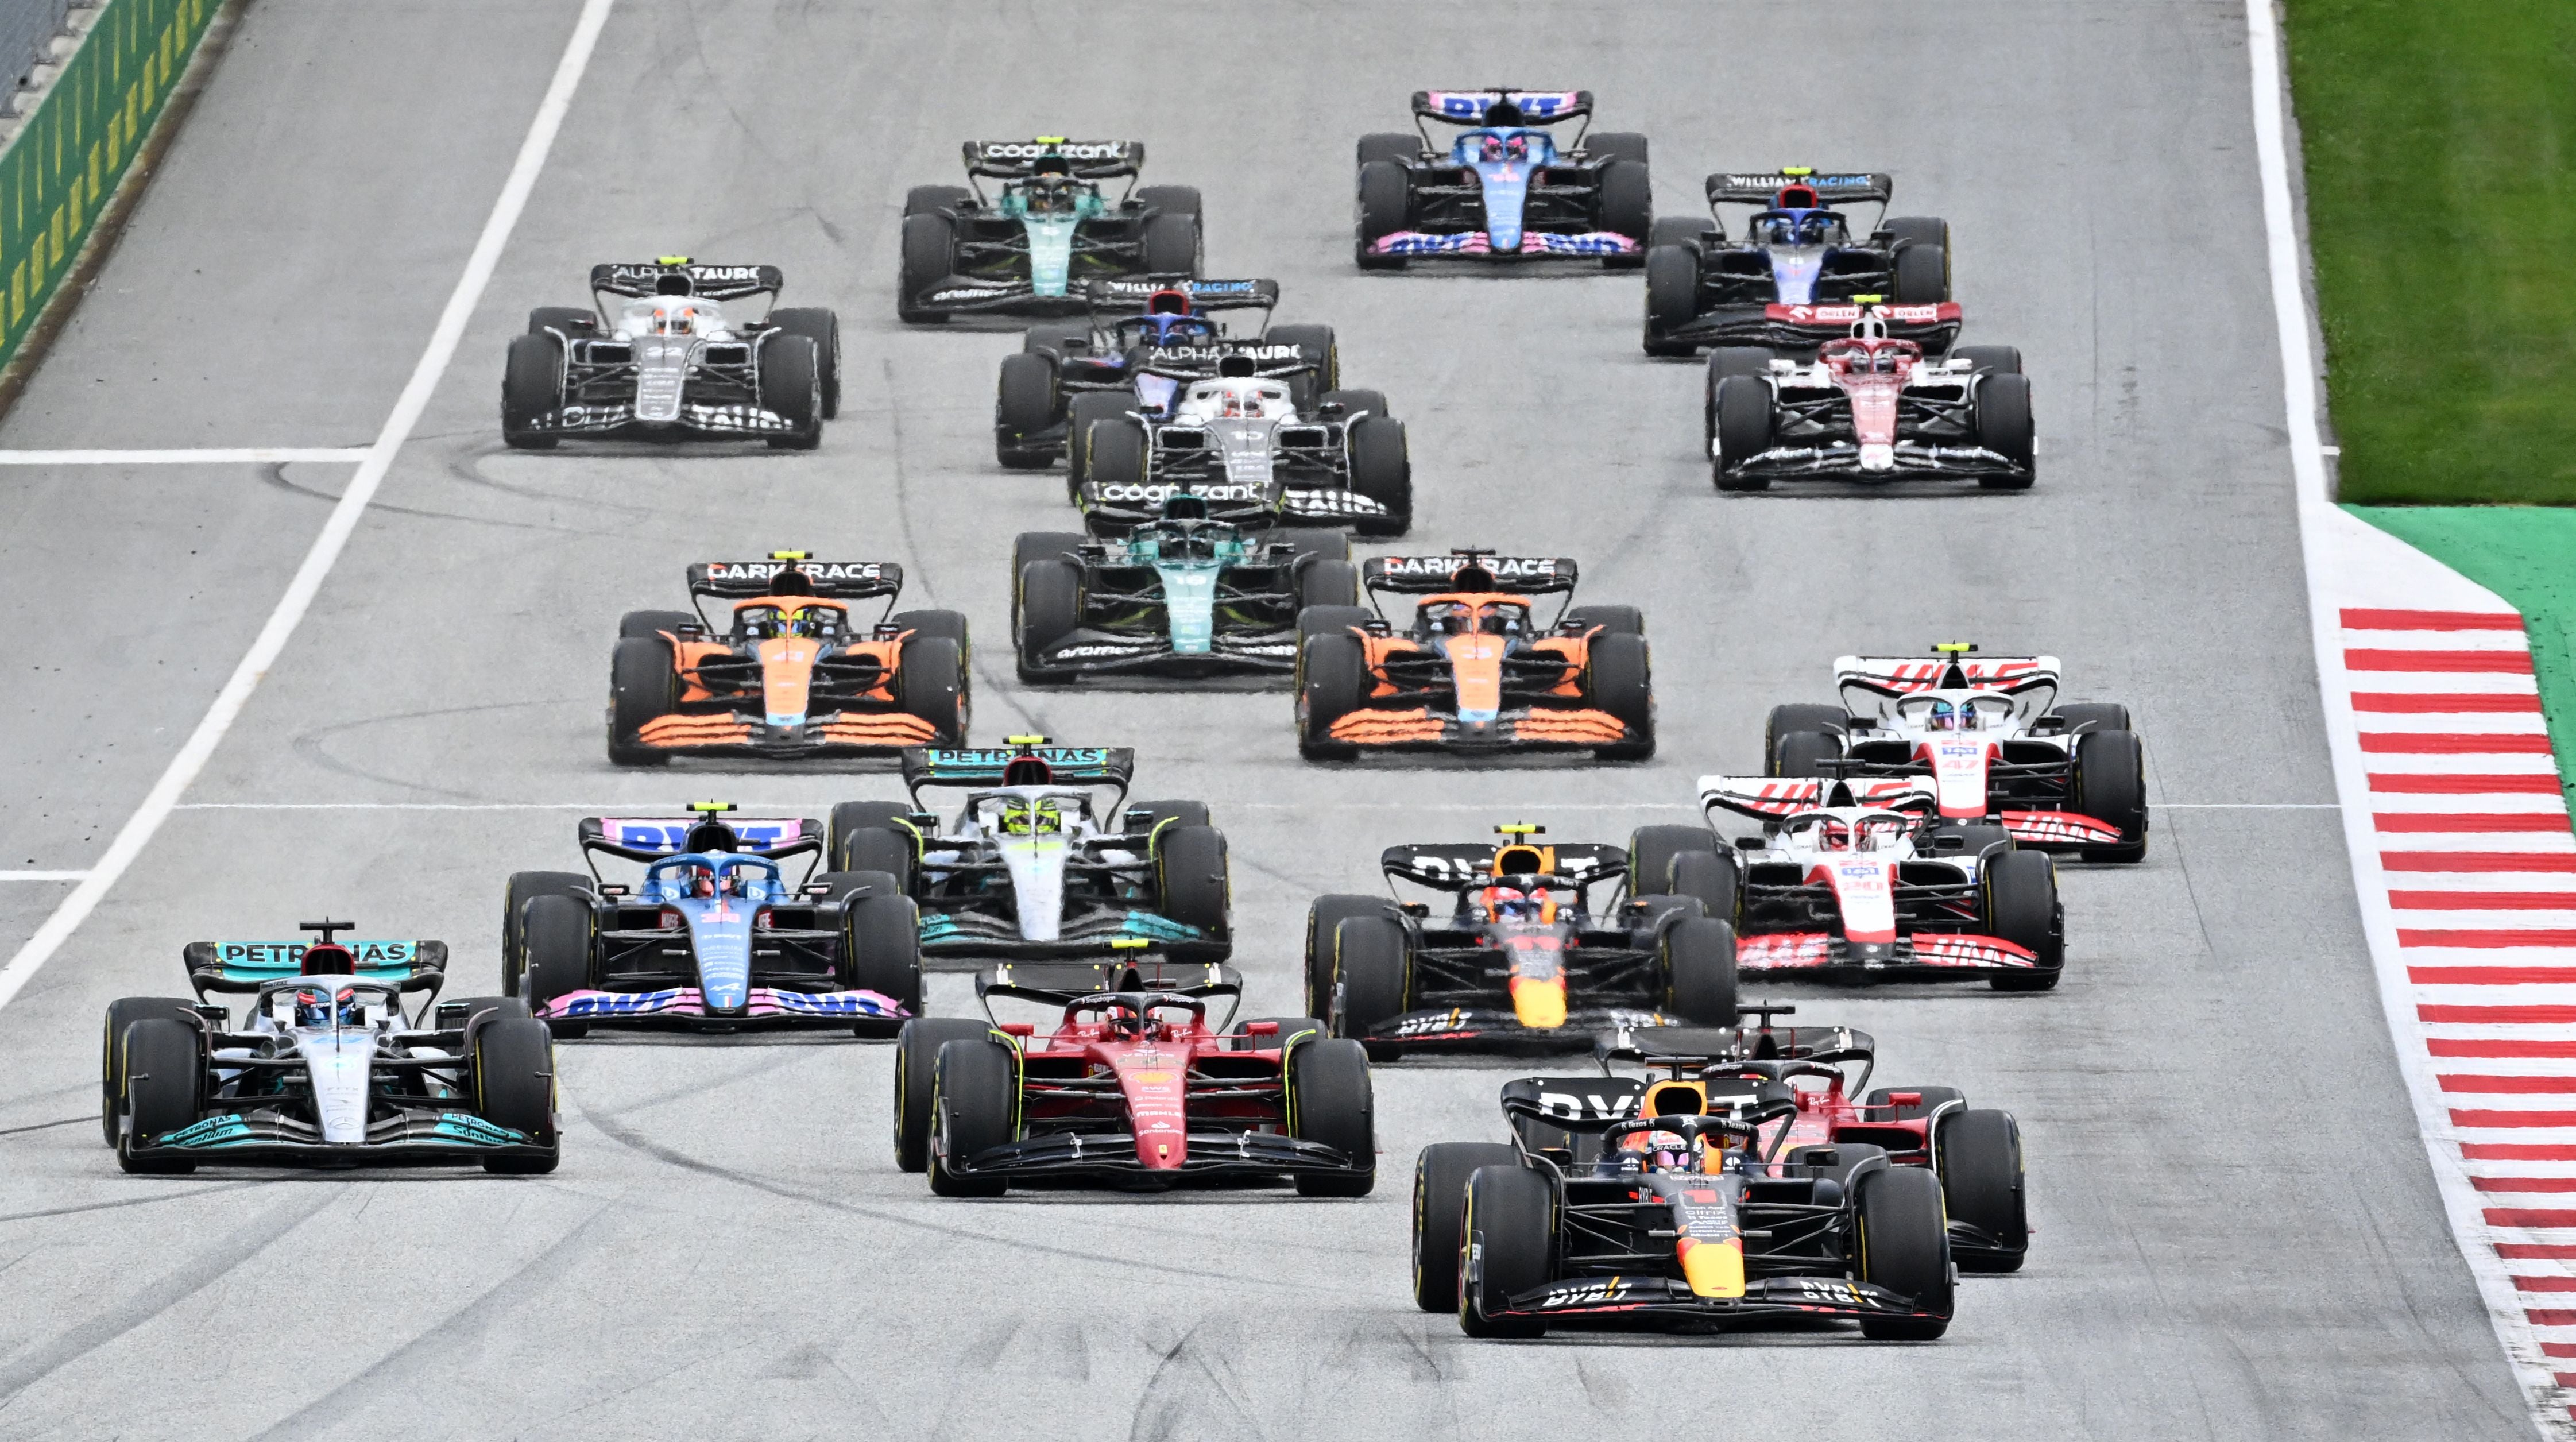 Max Verstappen takes the lead at the start of the Austrian Grand Prix earlier this month